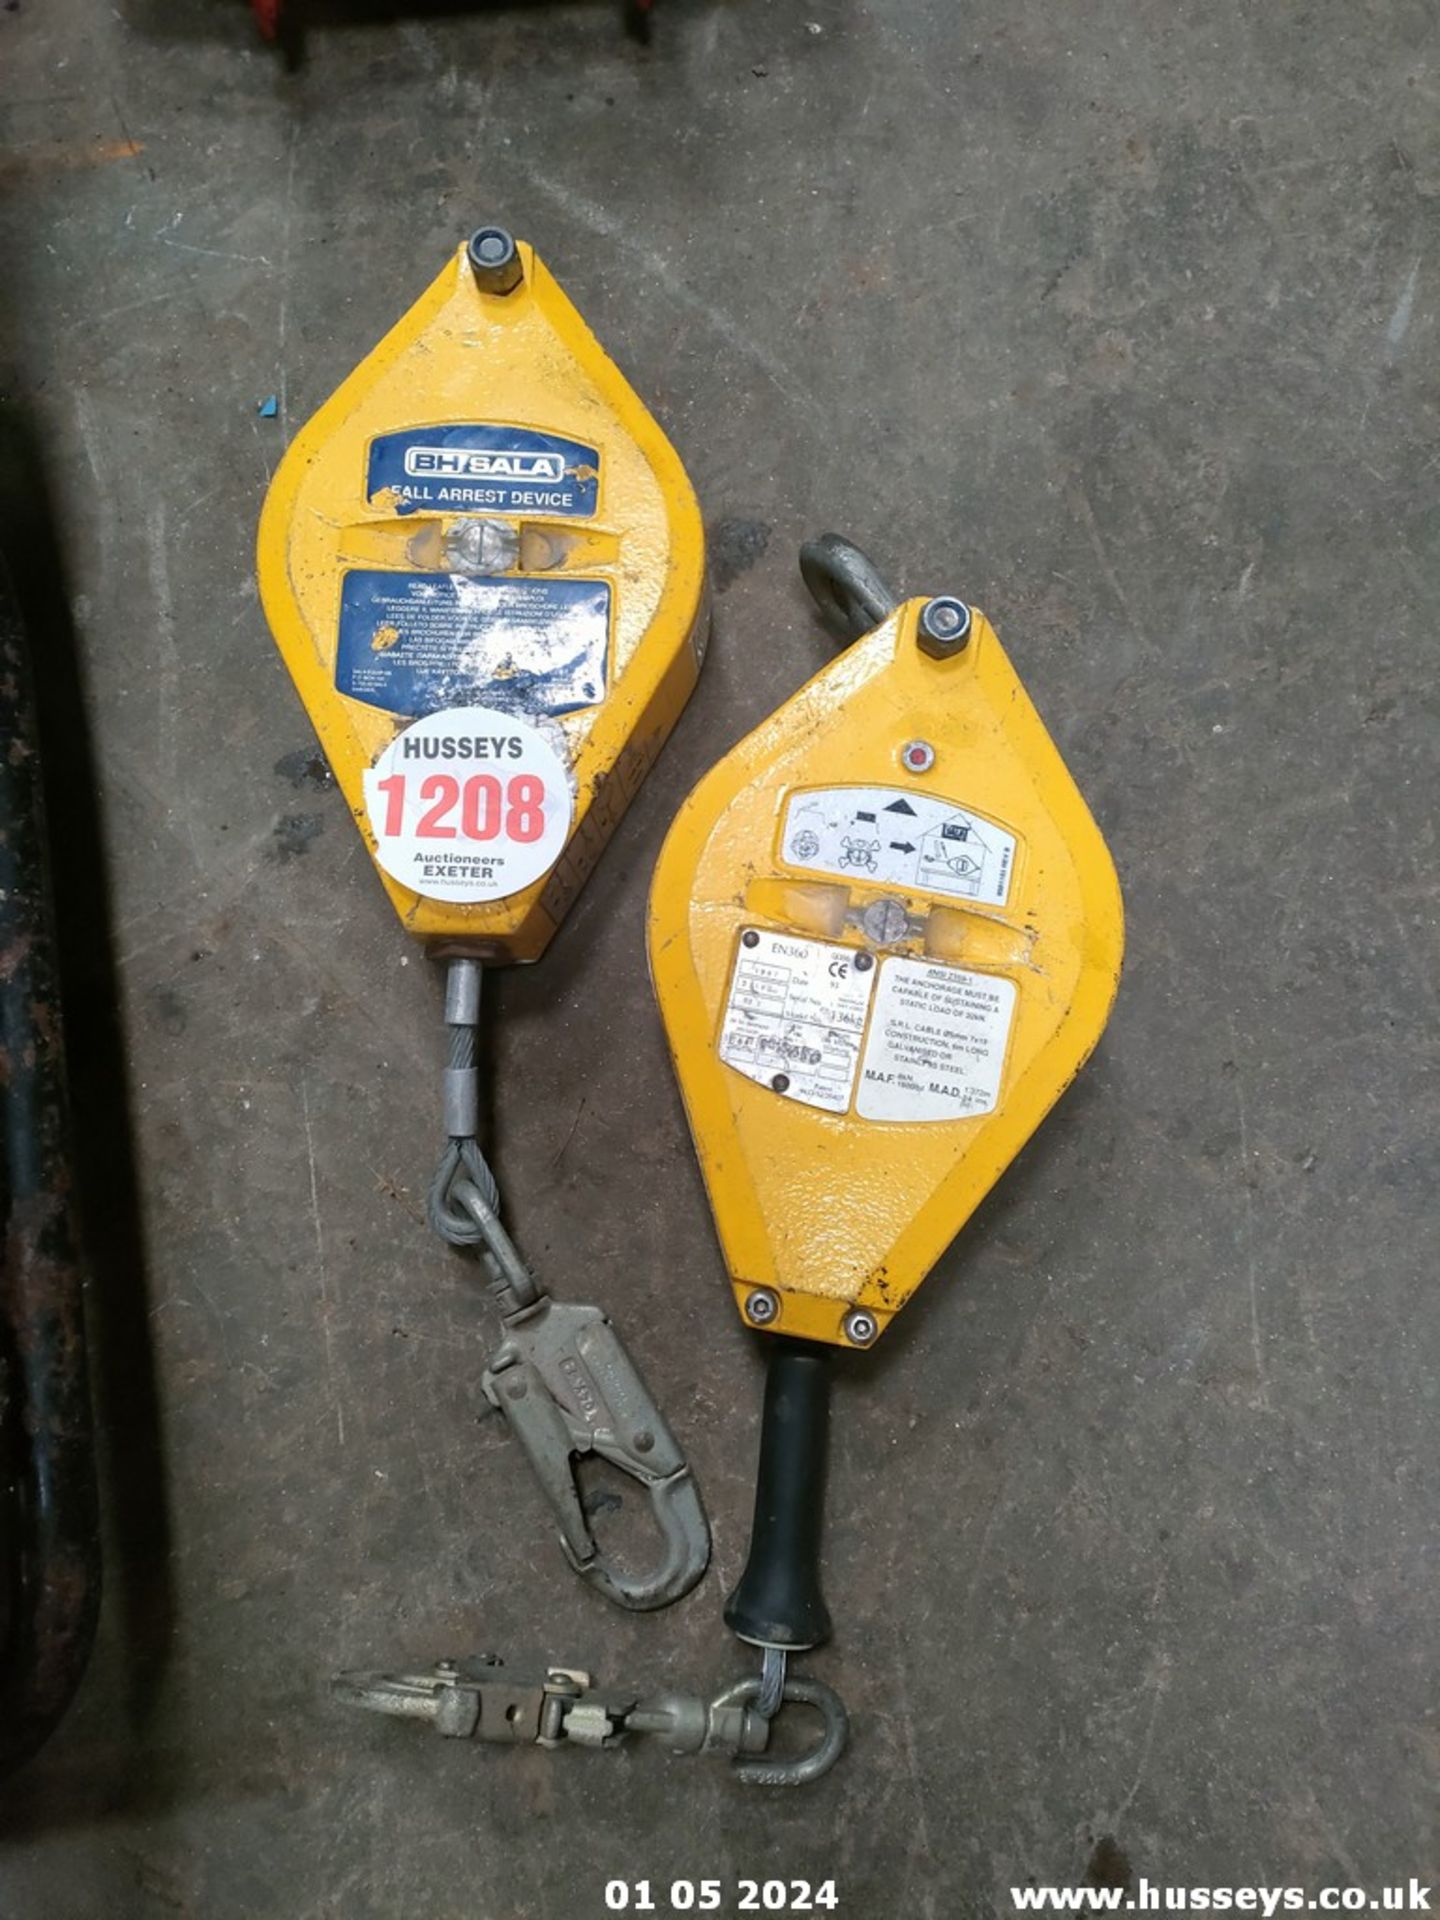 2 FALL ARREST DEVICES